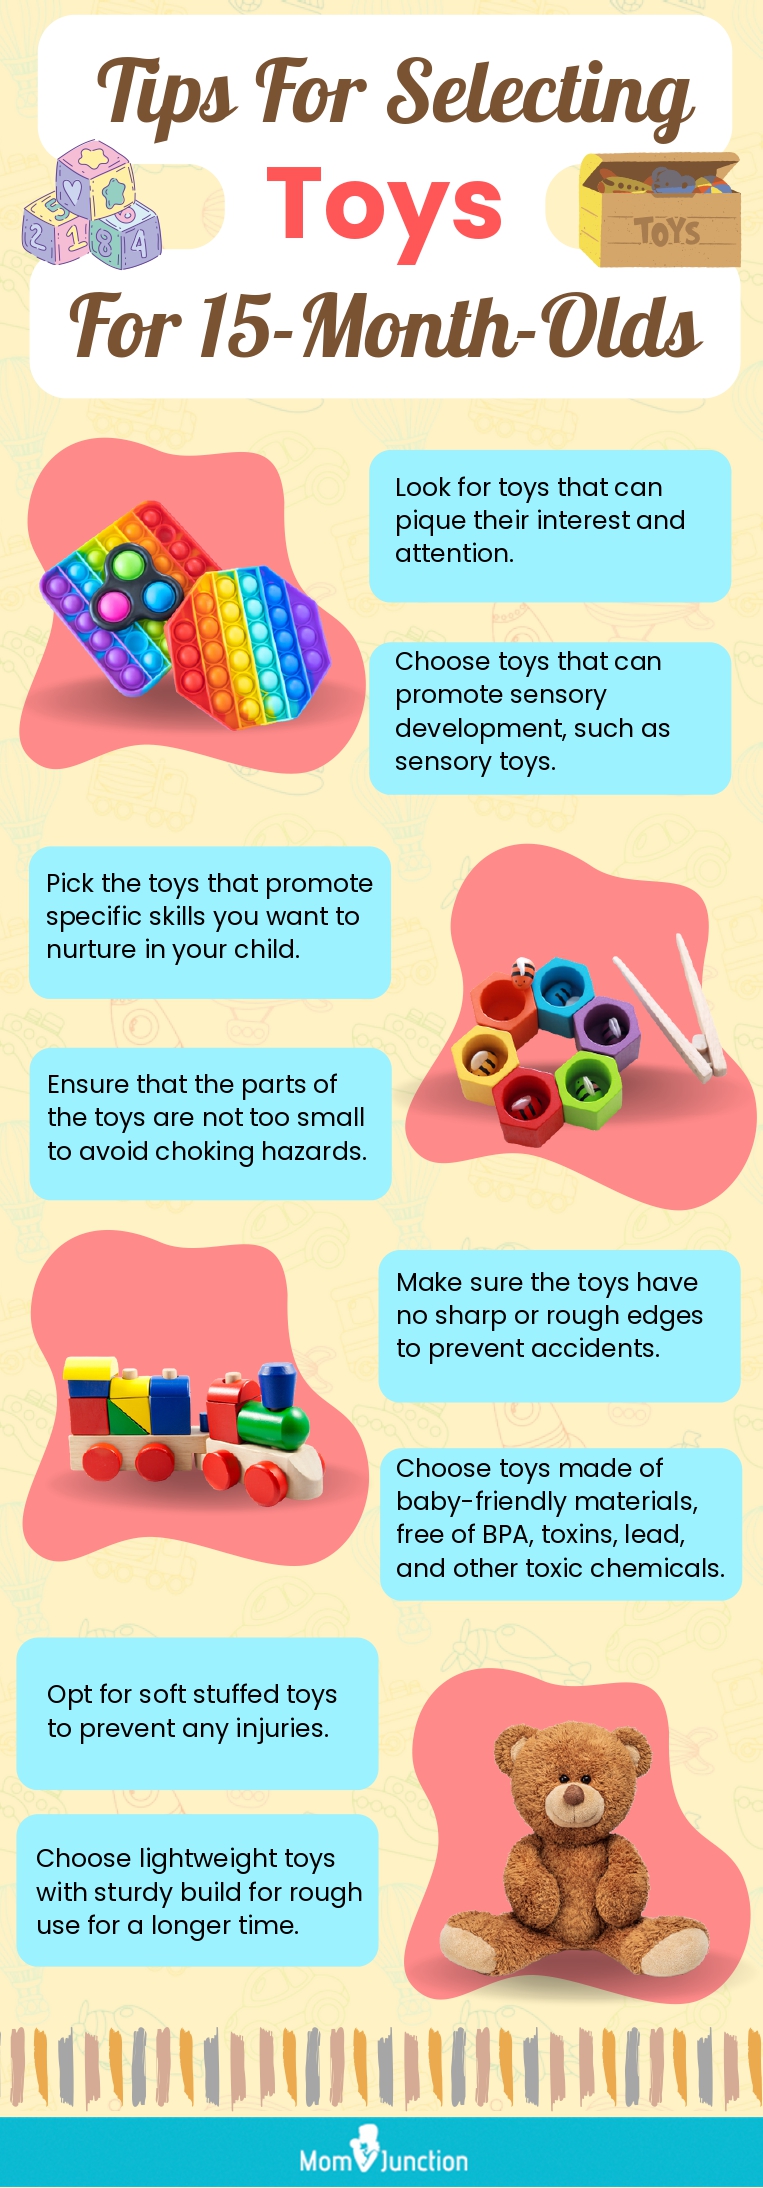 Tips For Selecting Toys For 15 Month Olds (infographic)